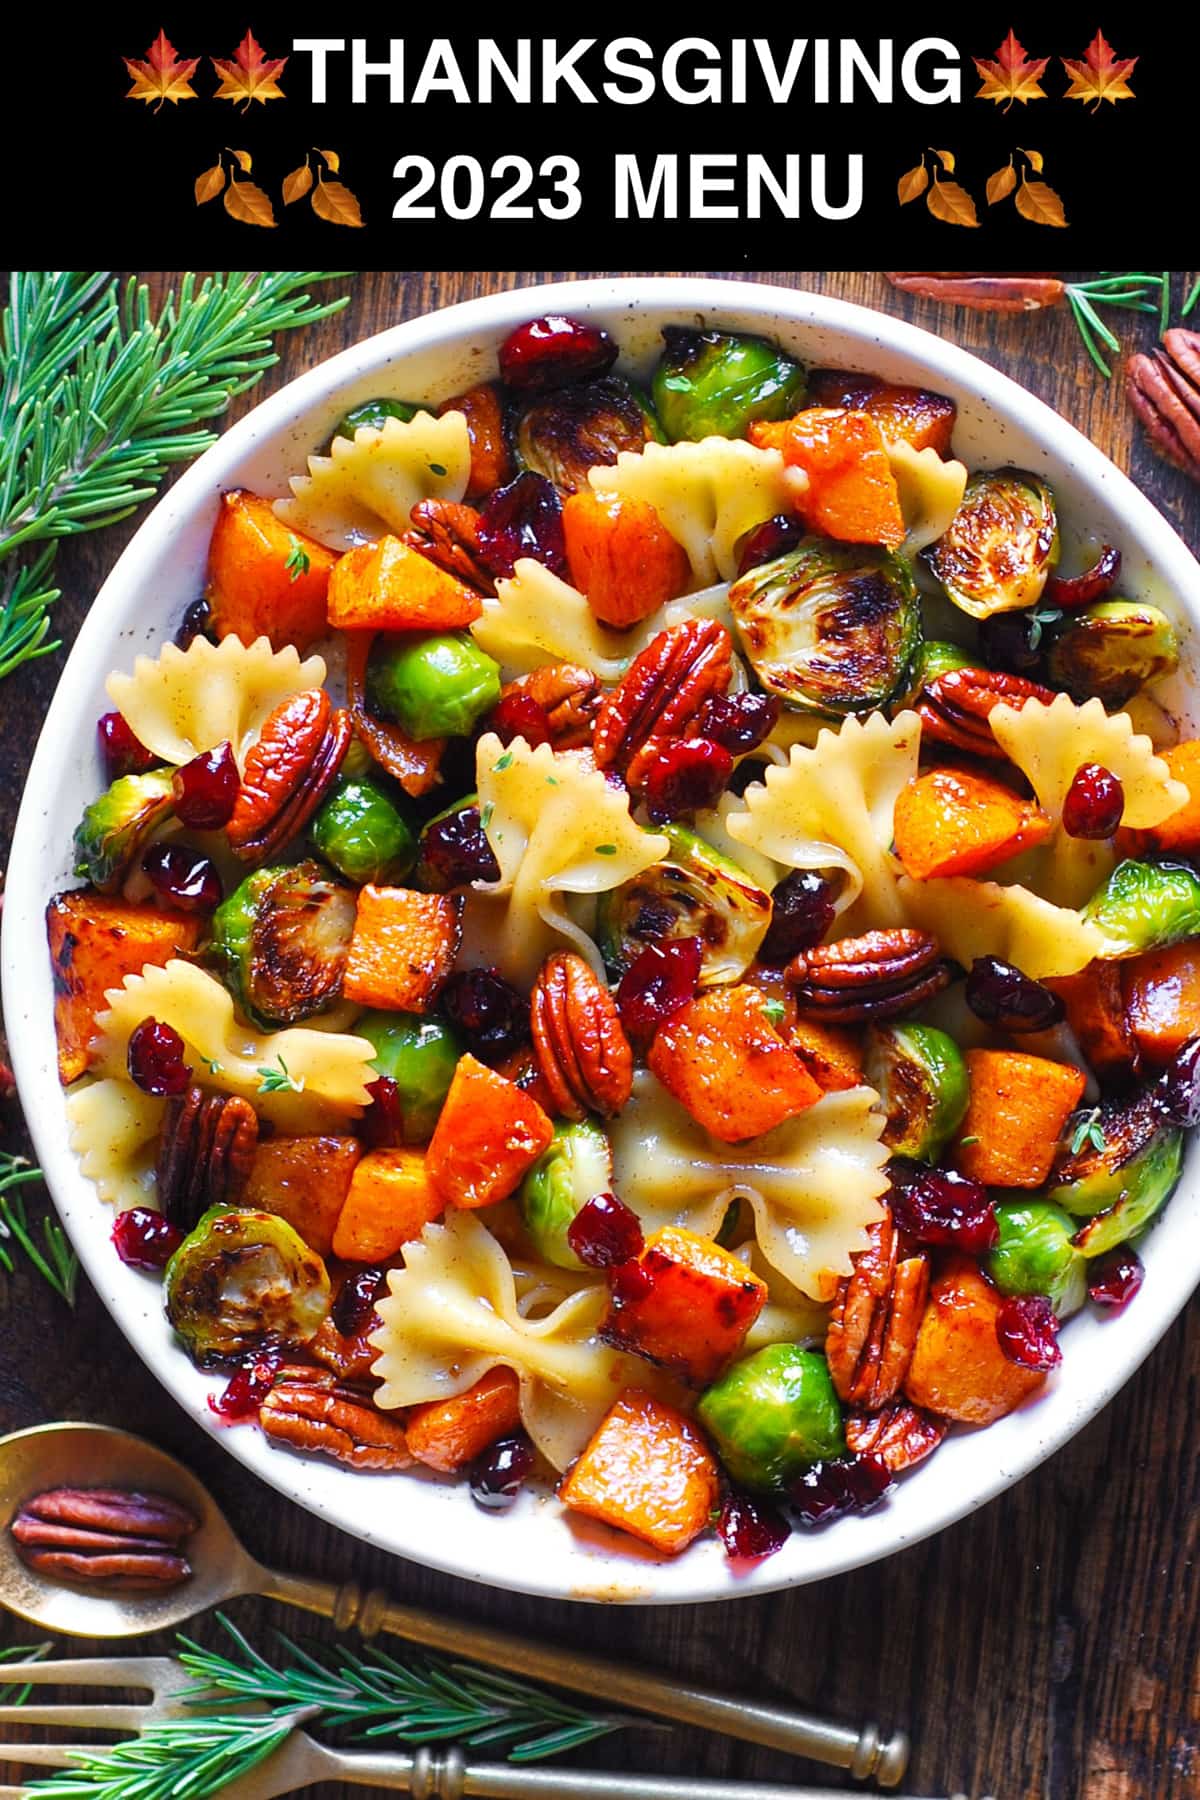 Fall Pasta Salad with Roasted Butternut Squash, Brussels Sprouts, Pecans, and Cranberries - in a white bowl.